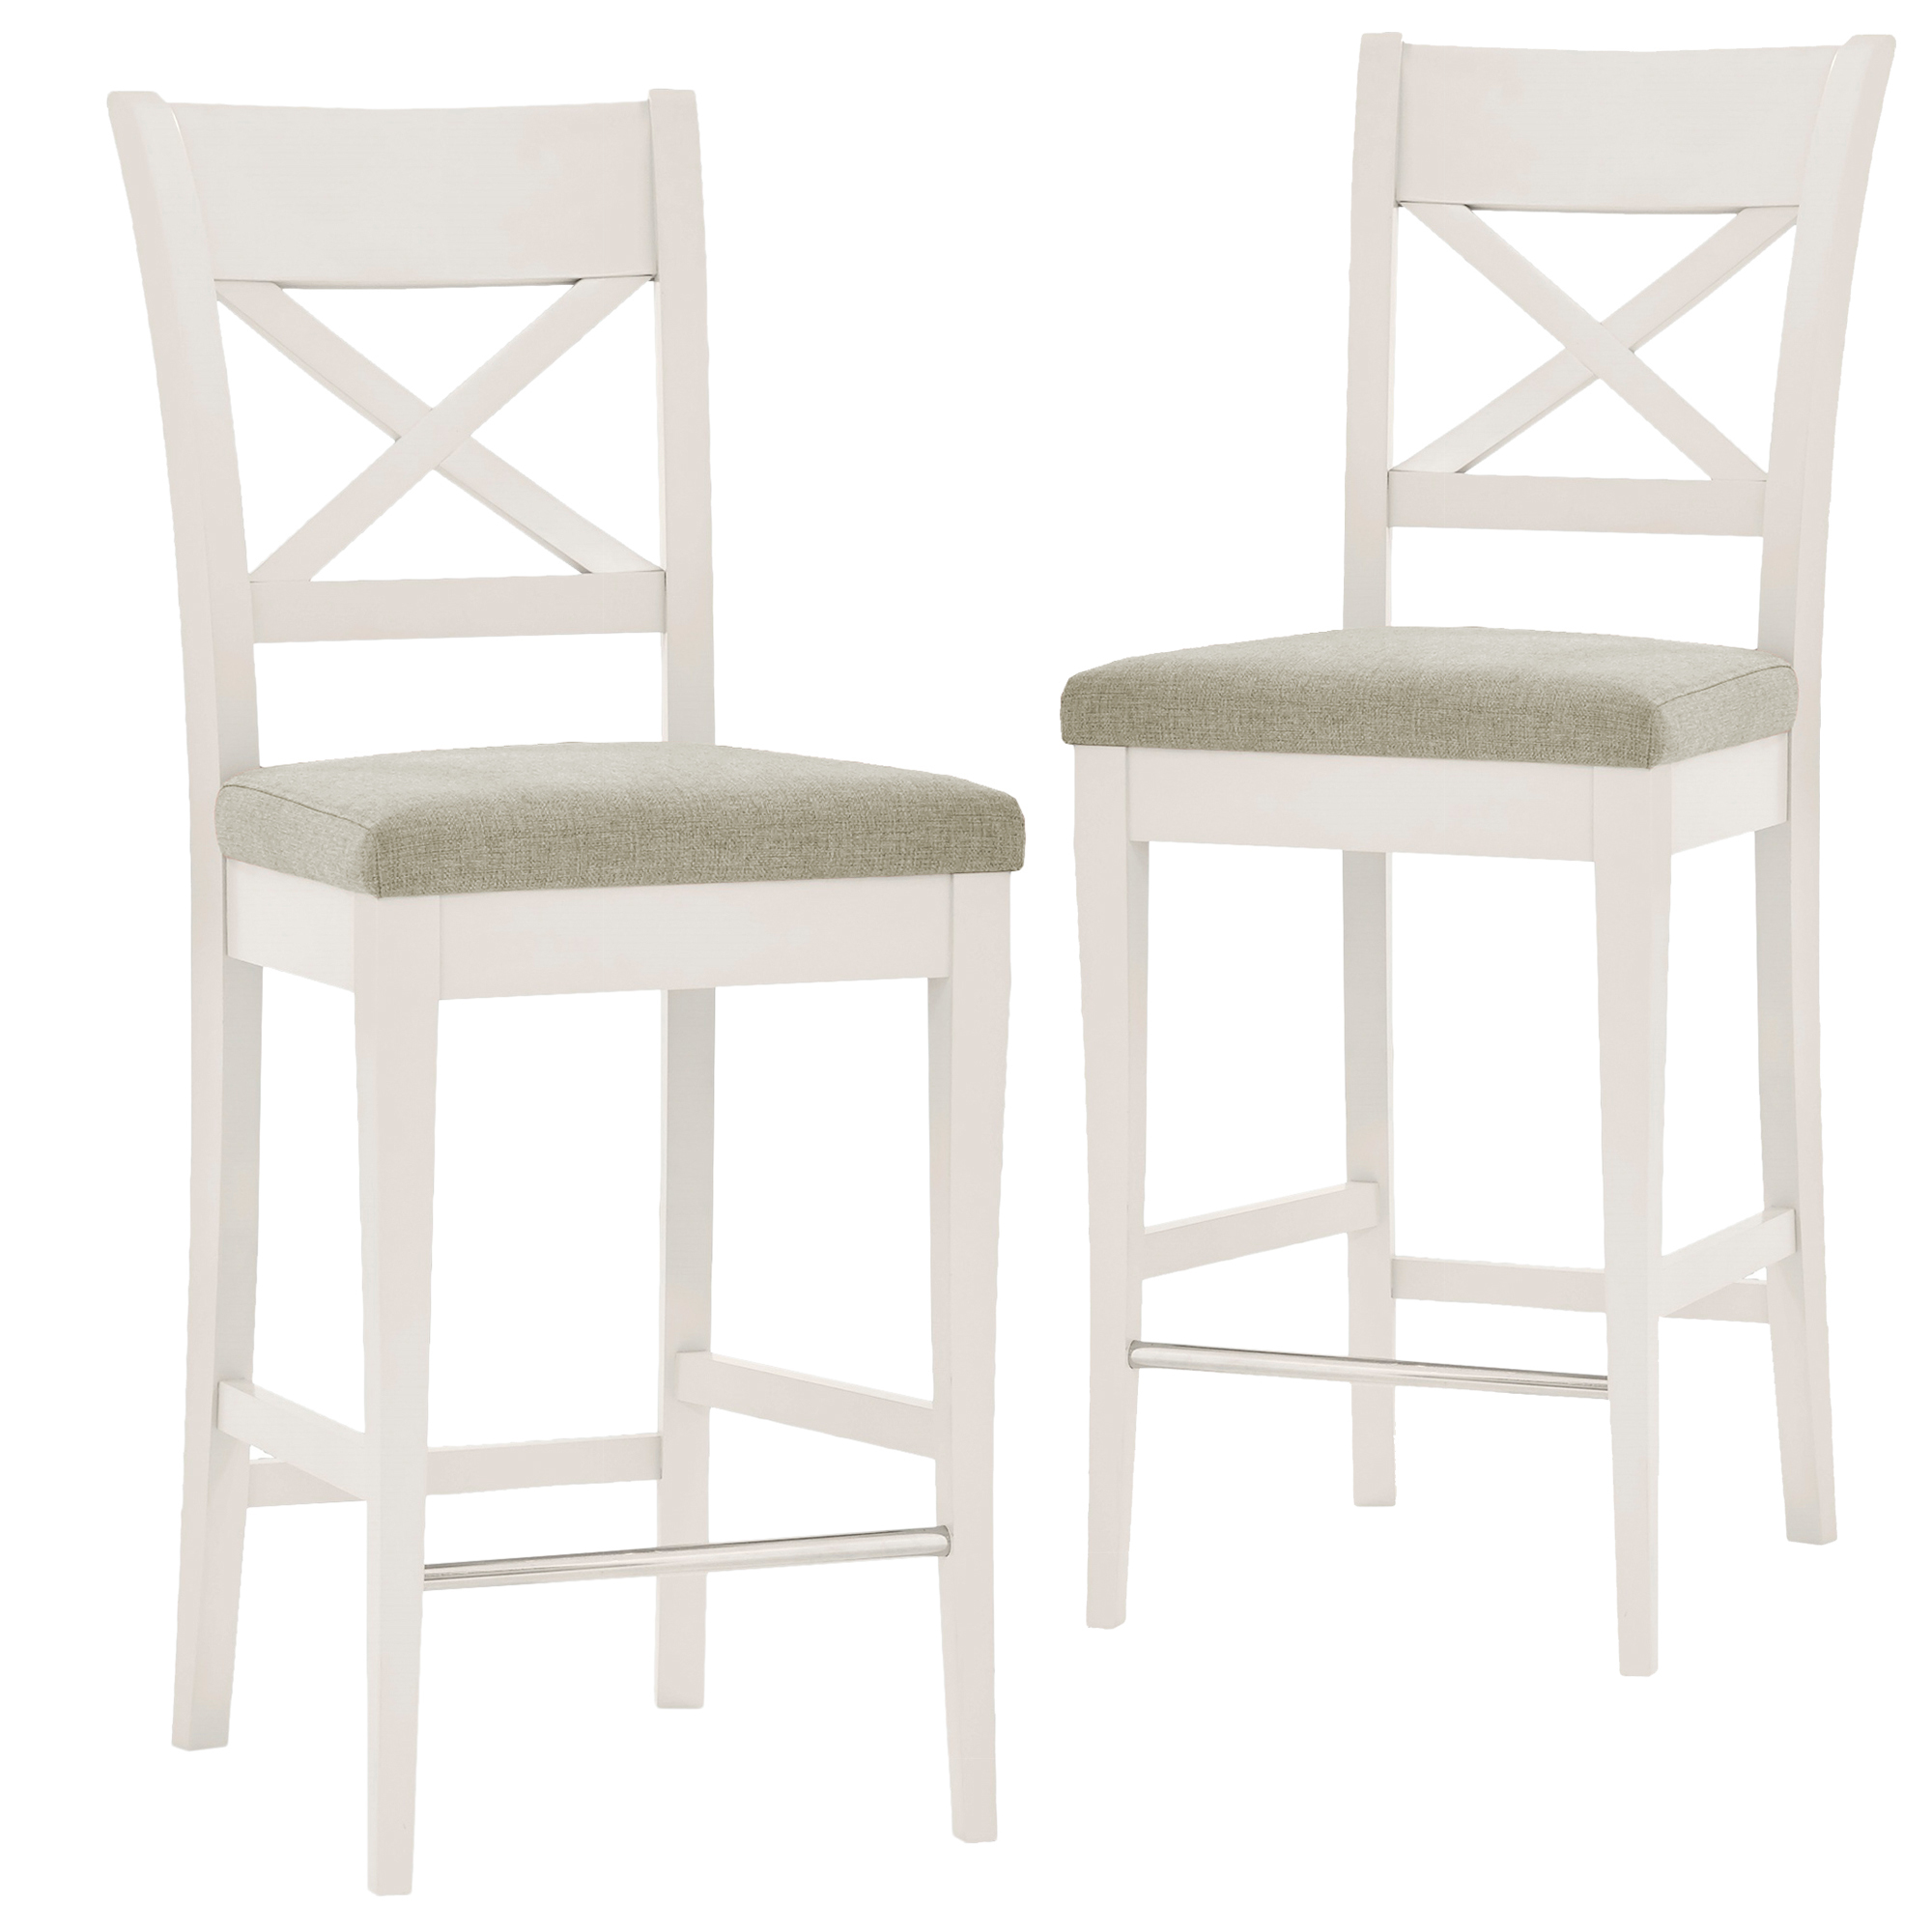 Temple Webster Emilia French, White Wooden Cross Back Bar Stool